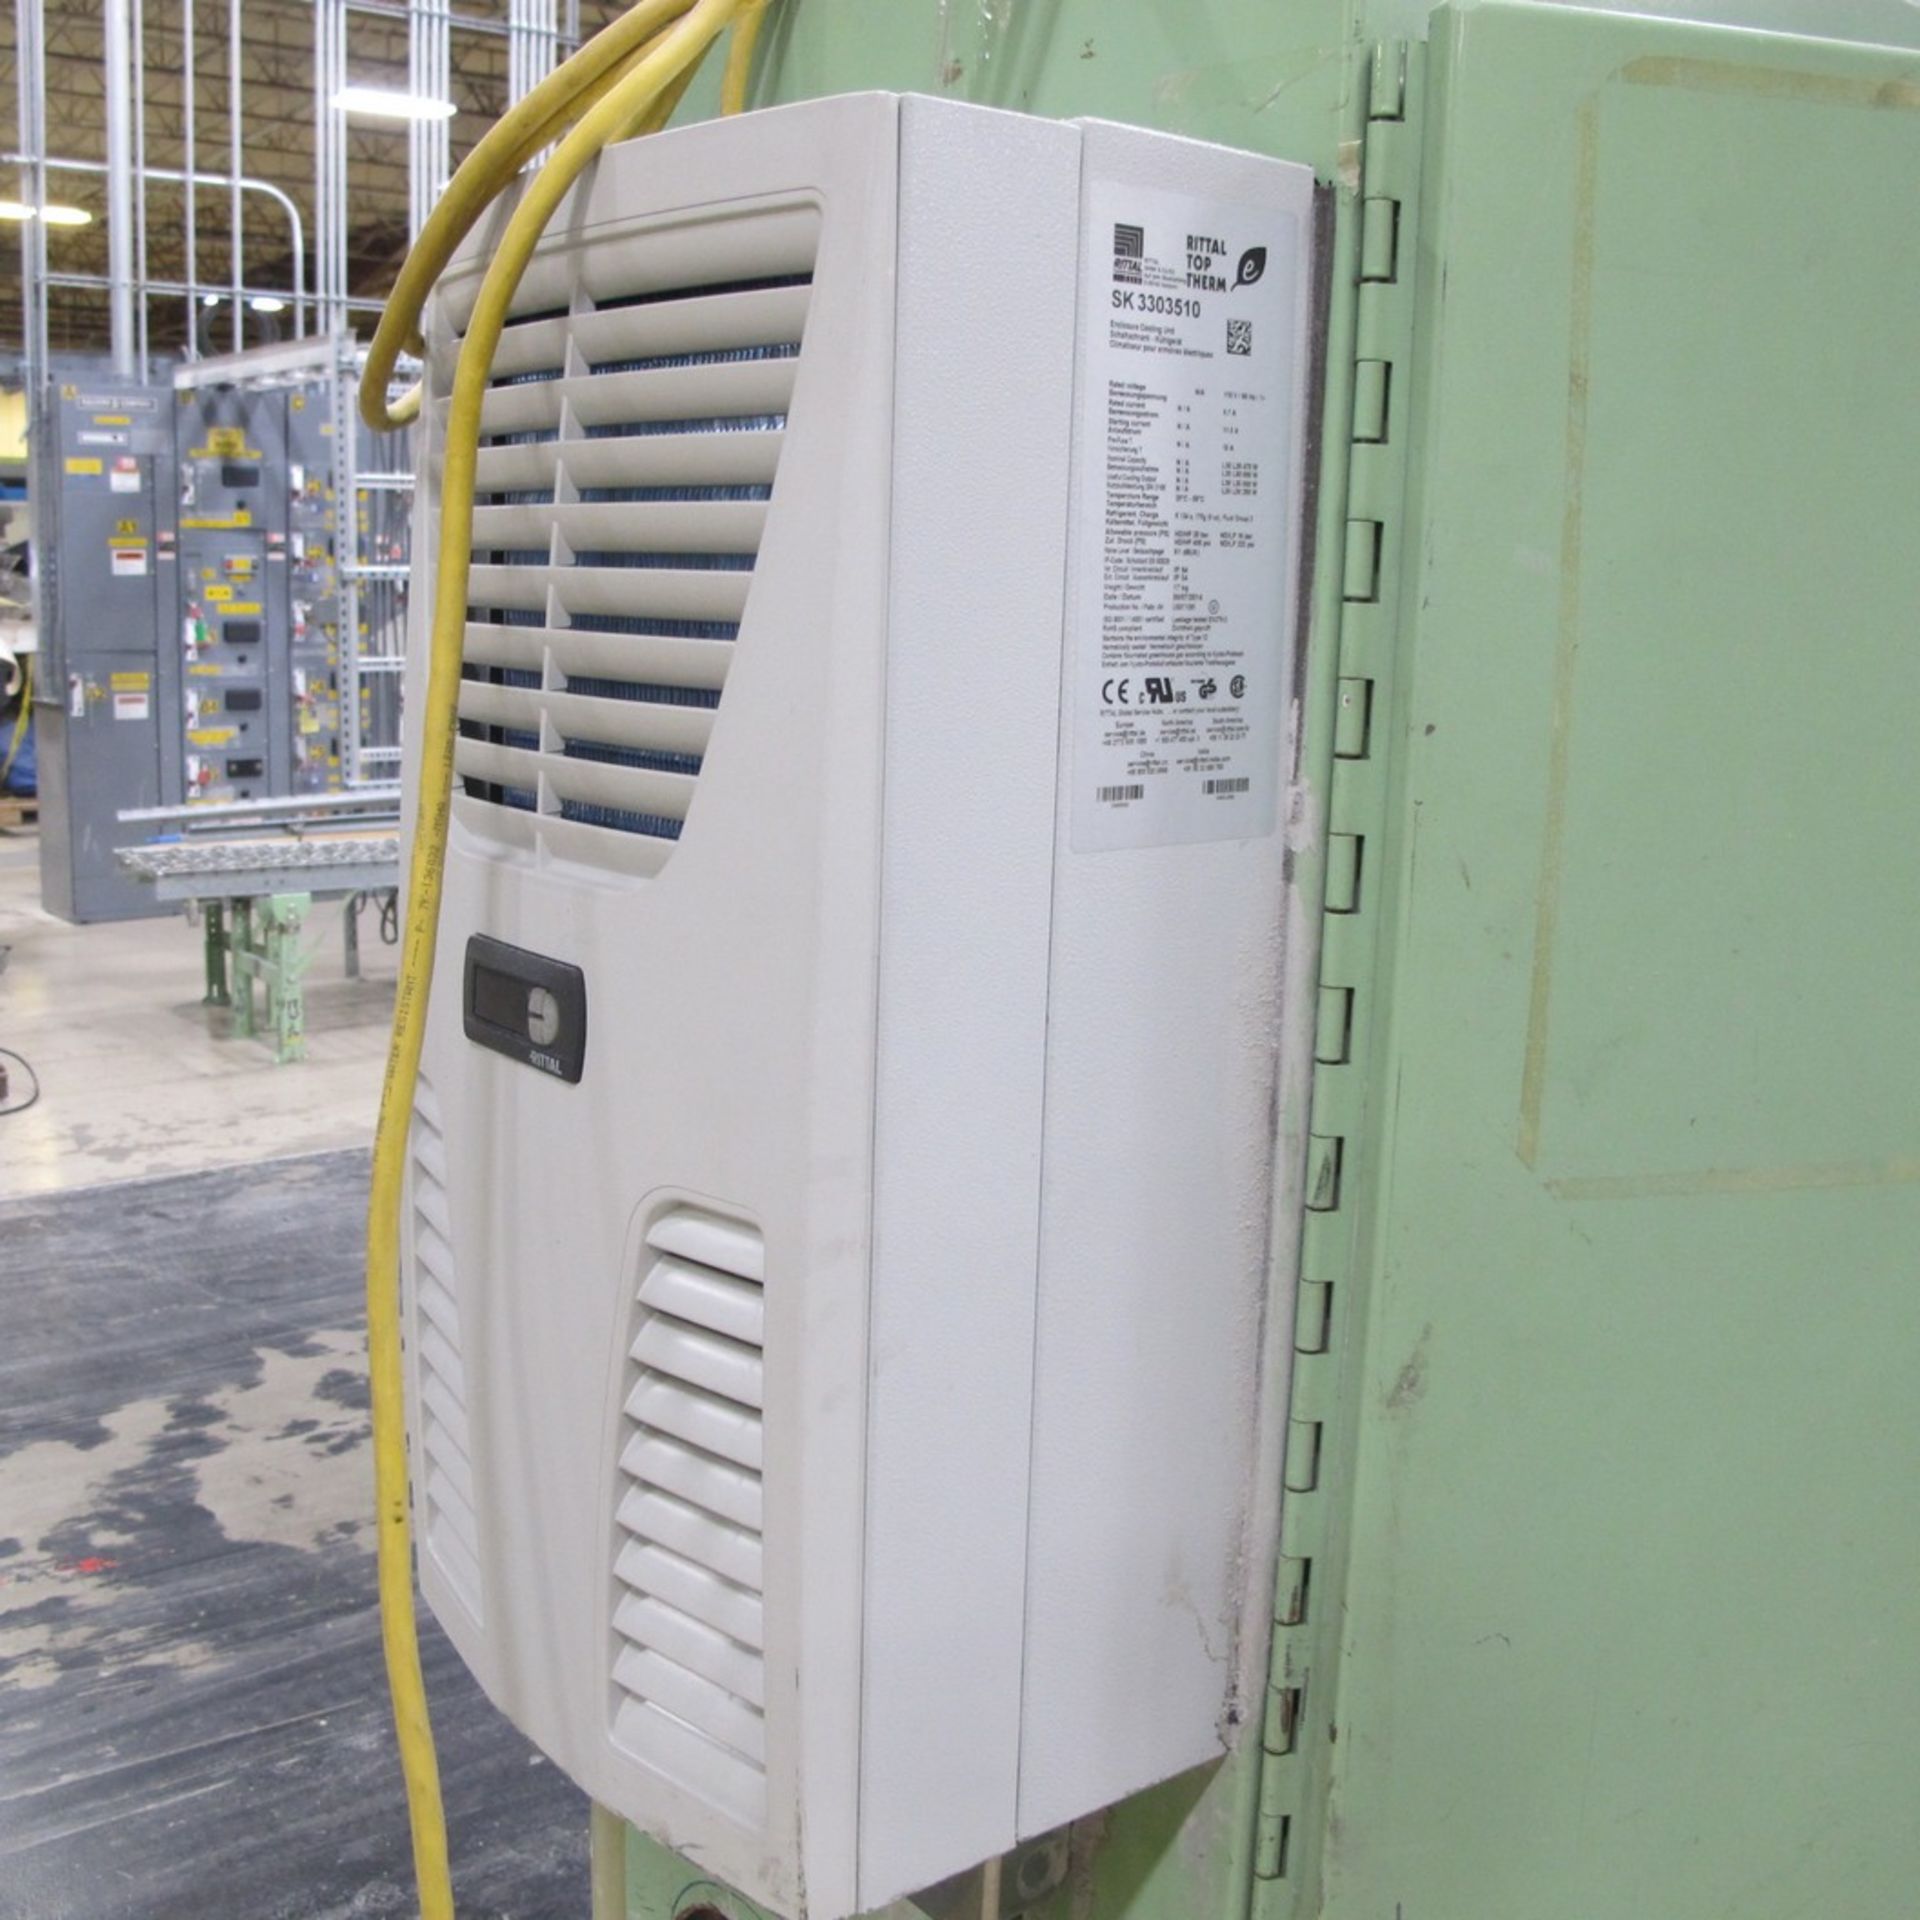 ELECTRICAL CONTROL CABINET W/ INDRAMAT SERVO CONTROLLERS AND RITTAL COOLING UNIT (BATH B4) - Image 2 of 5